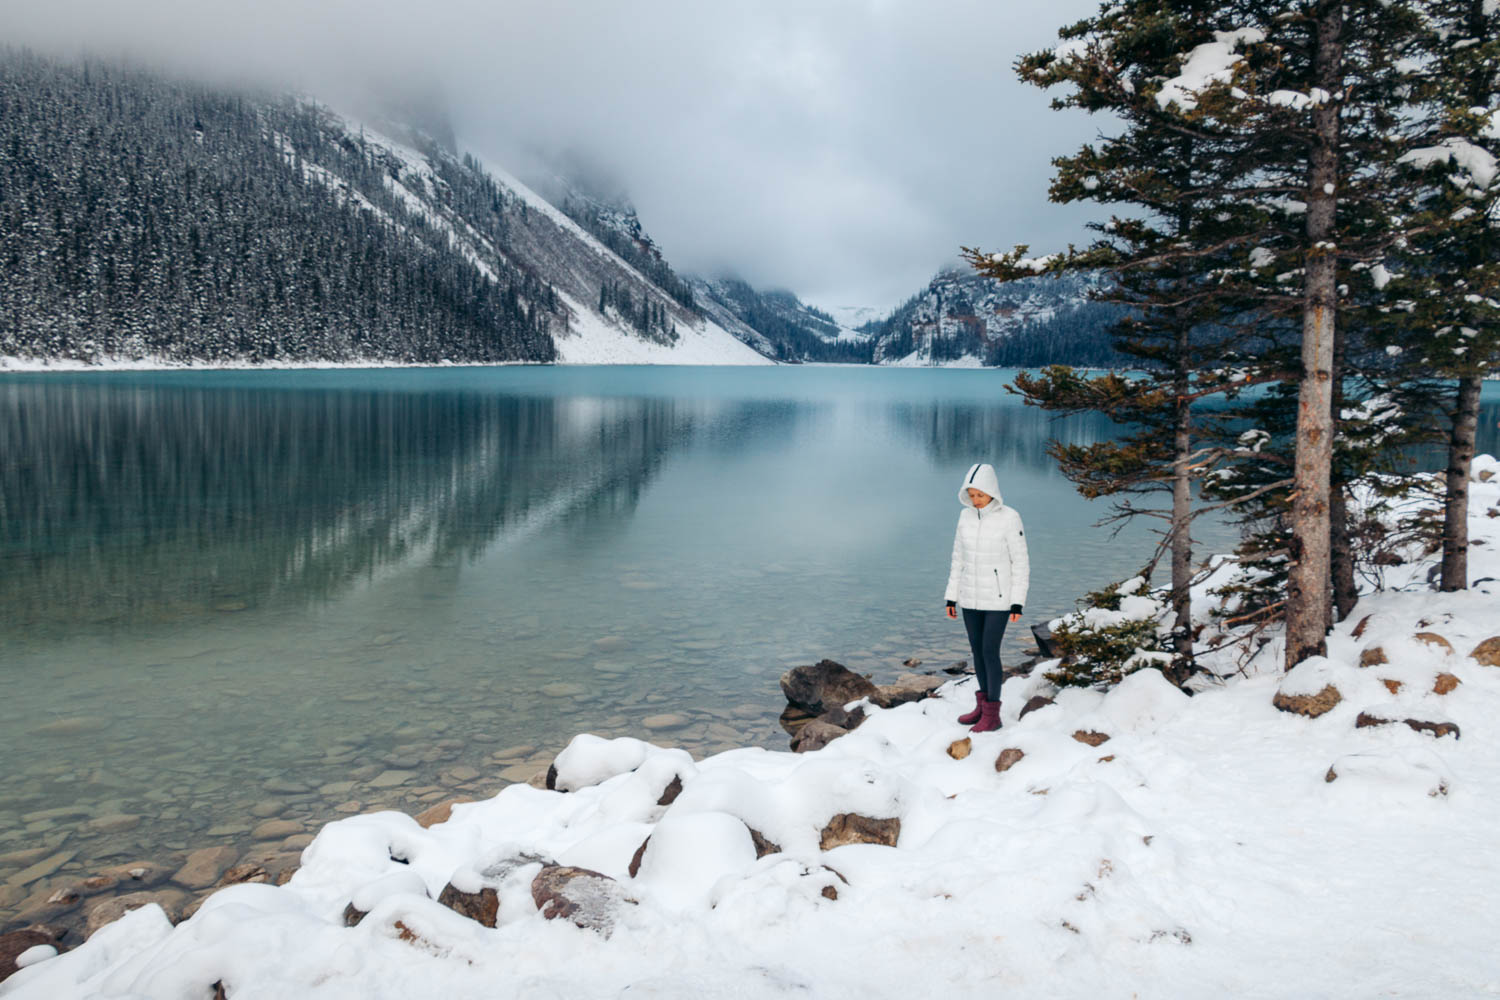 20+ Things You Need to Know before Visiting Lake Louise, Alberta